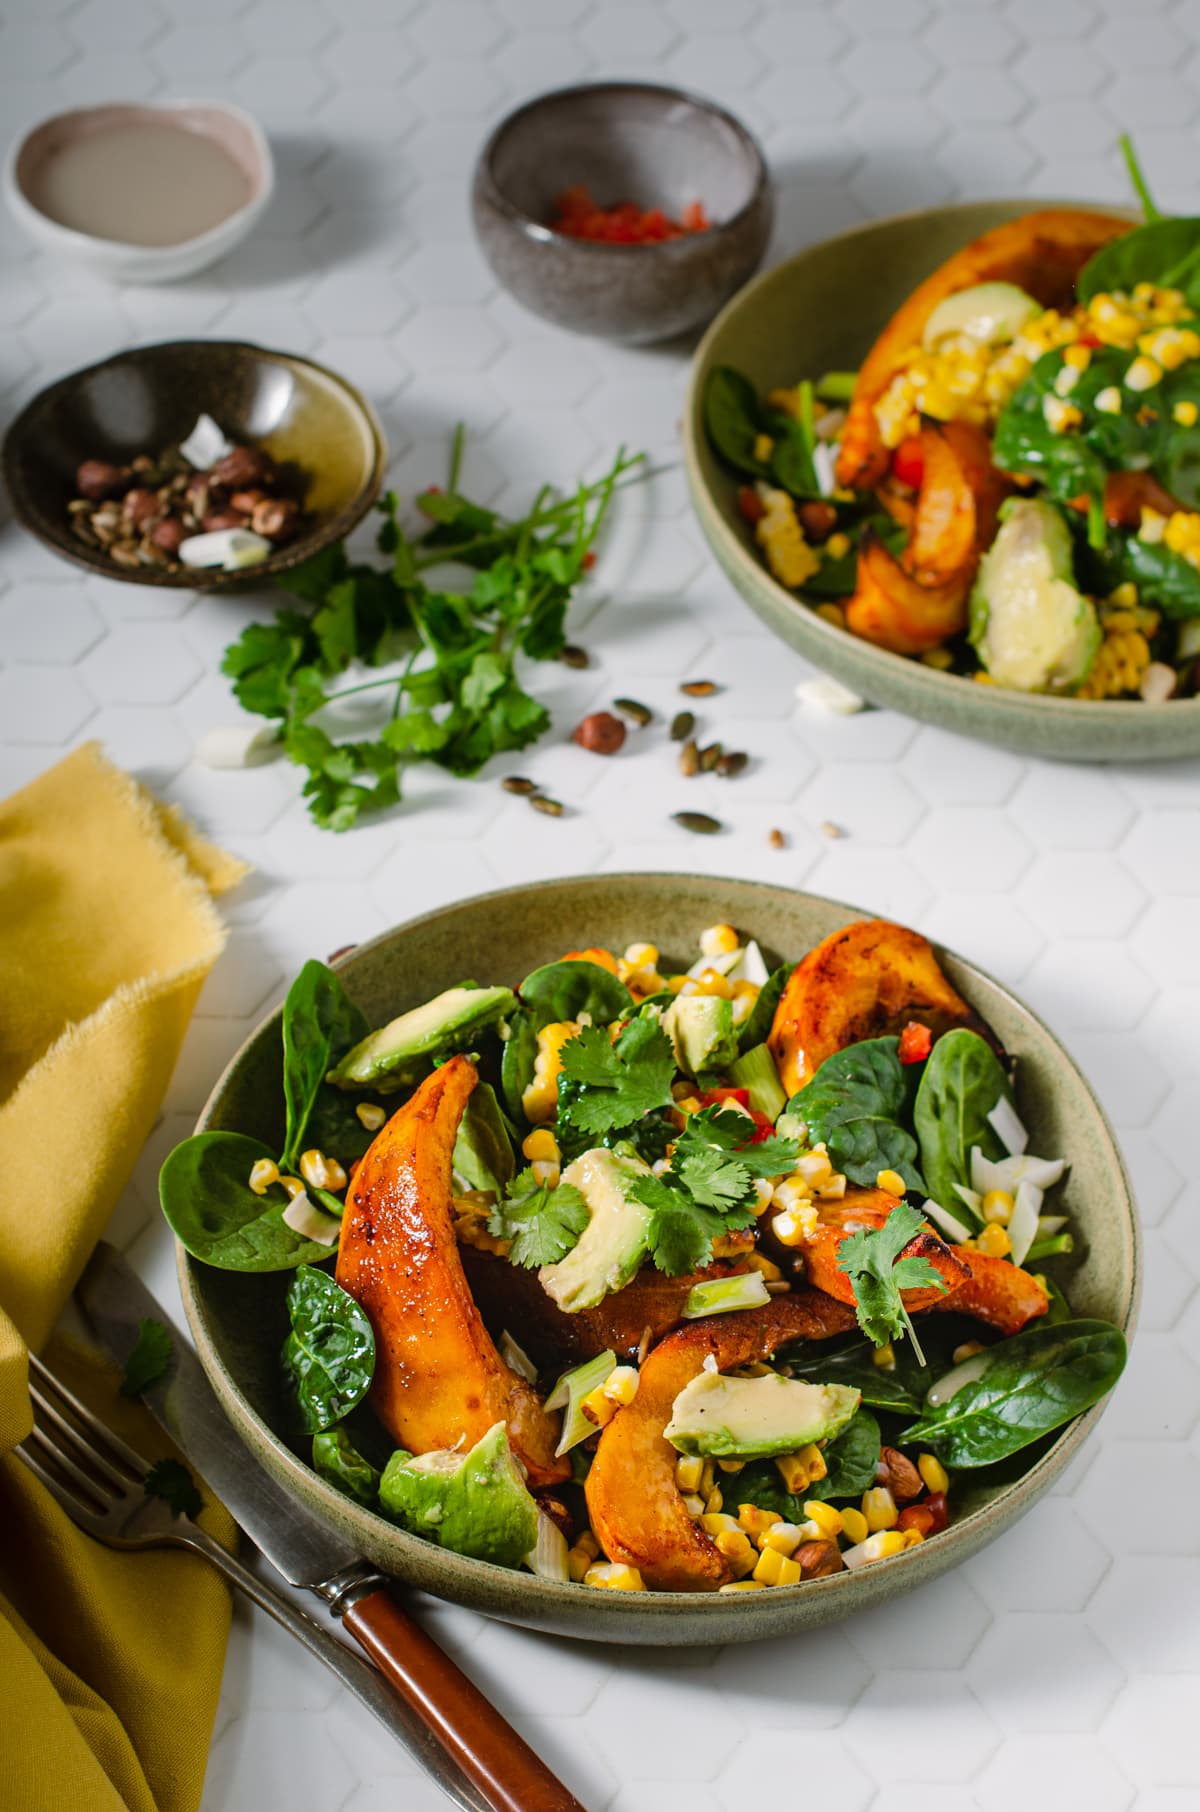 A delicious and fresh roasted pumpkin salad, with charred sweetcorn, avocado and spinach.